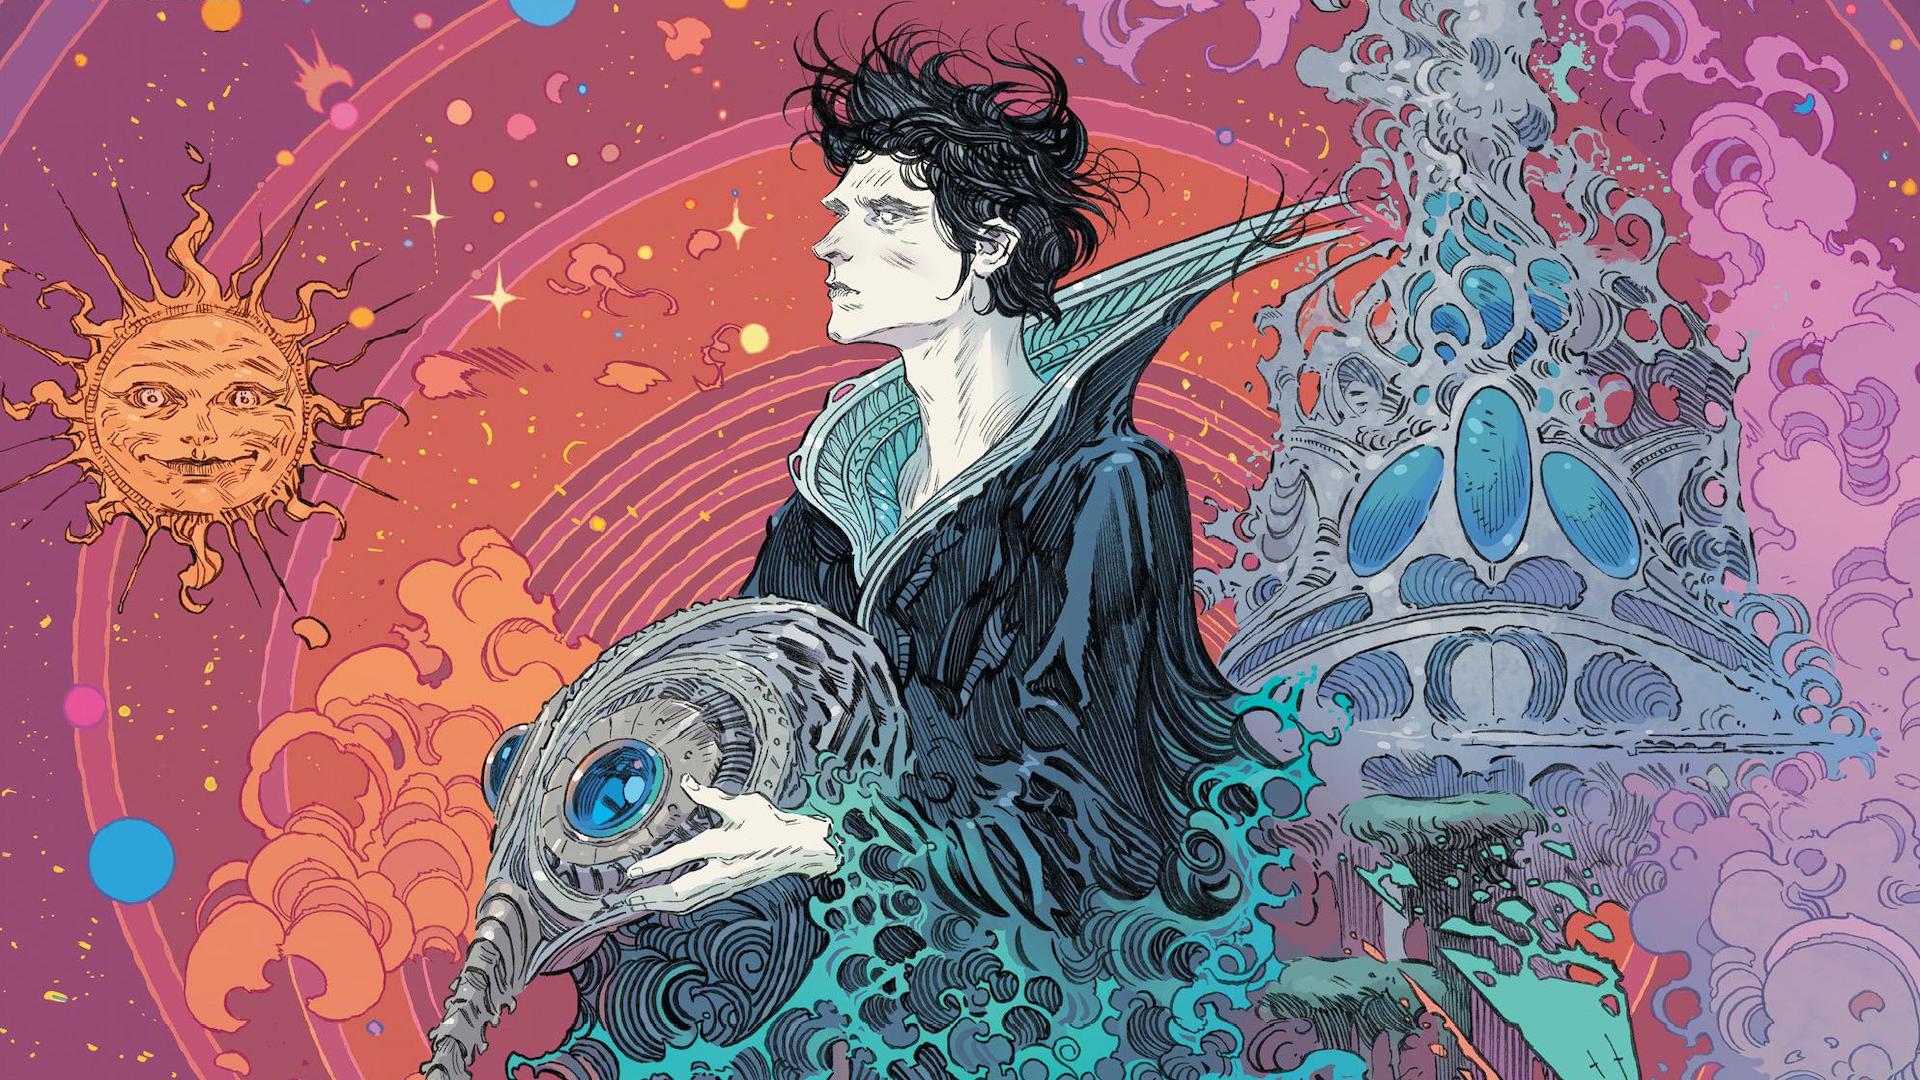 The Ics You Should Read After Finish With Sandman